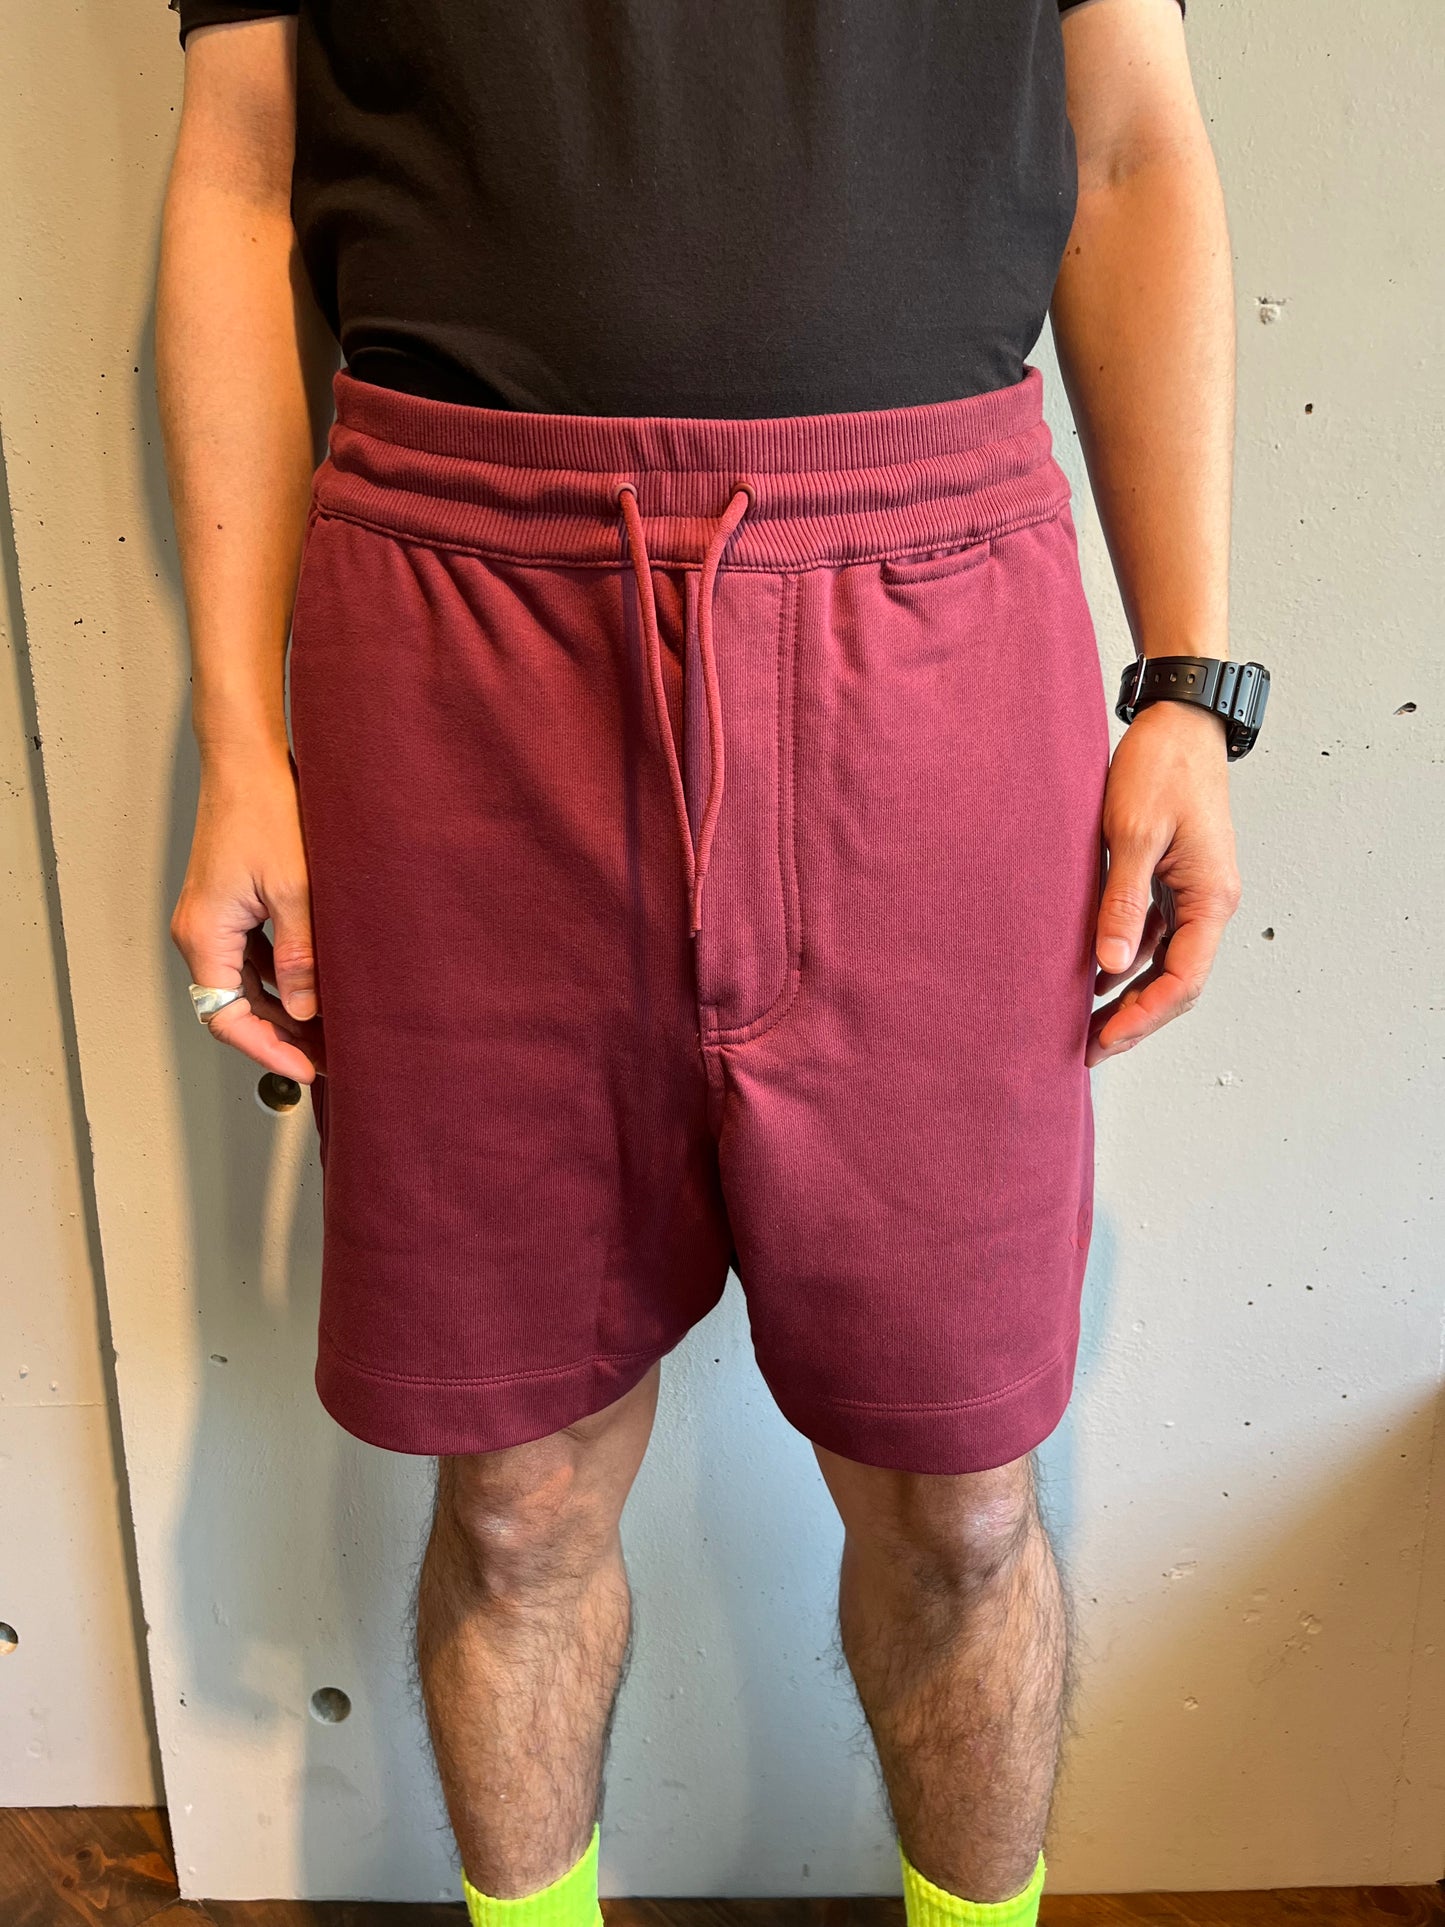 FRENCH TERRY SHORT PANTS(FT SHORTS)